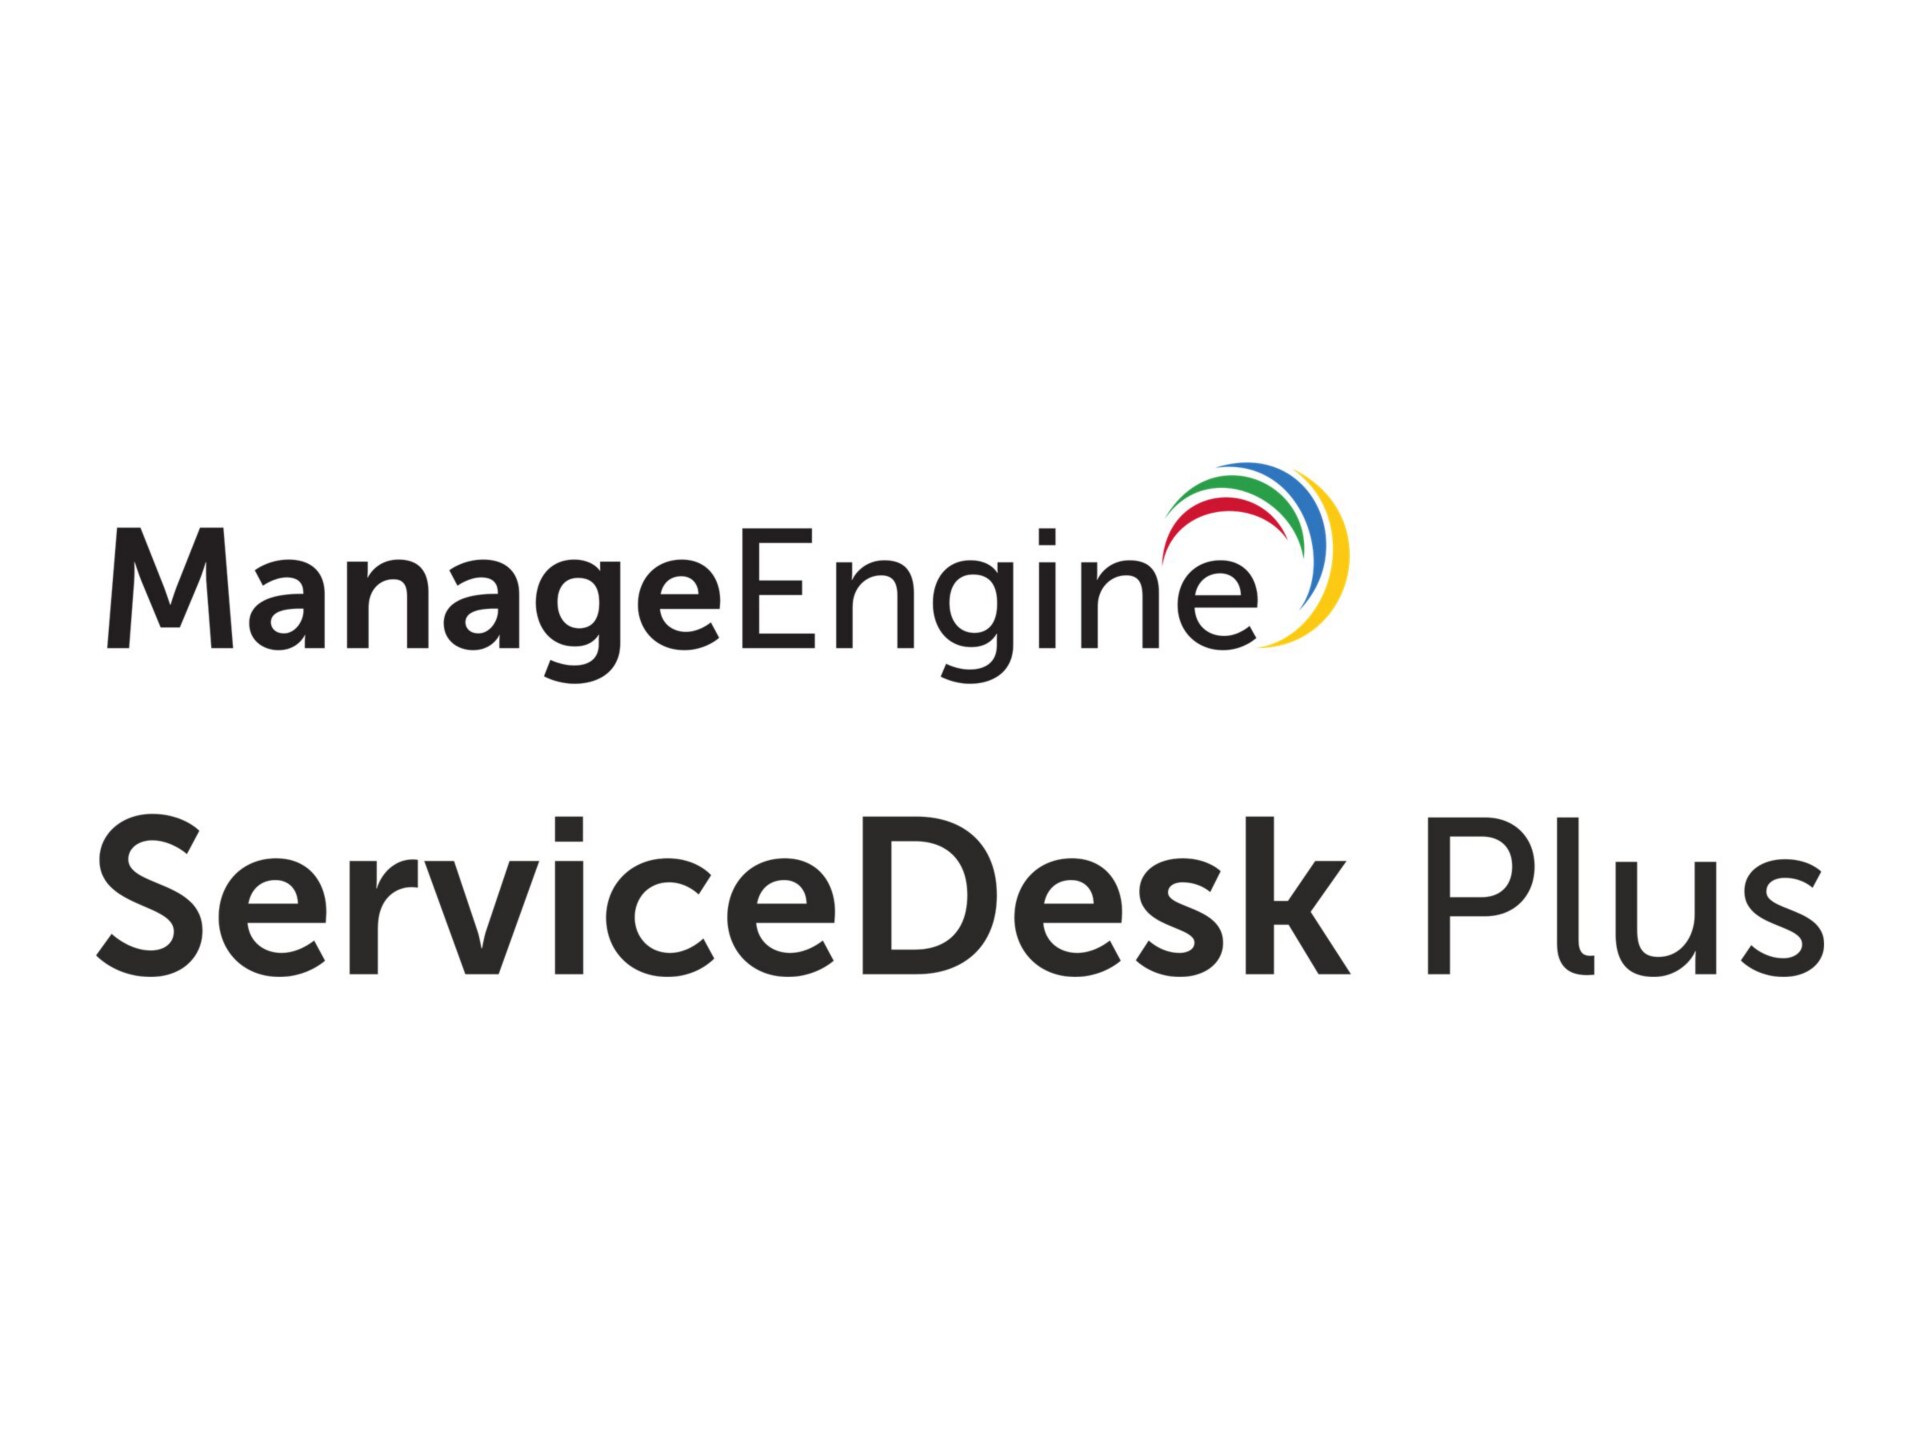 ManageEngine ServiceDesk Plus UEM Remote Access Plus Add-ons - subscription license (1 year) - 5 additional users